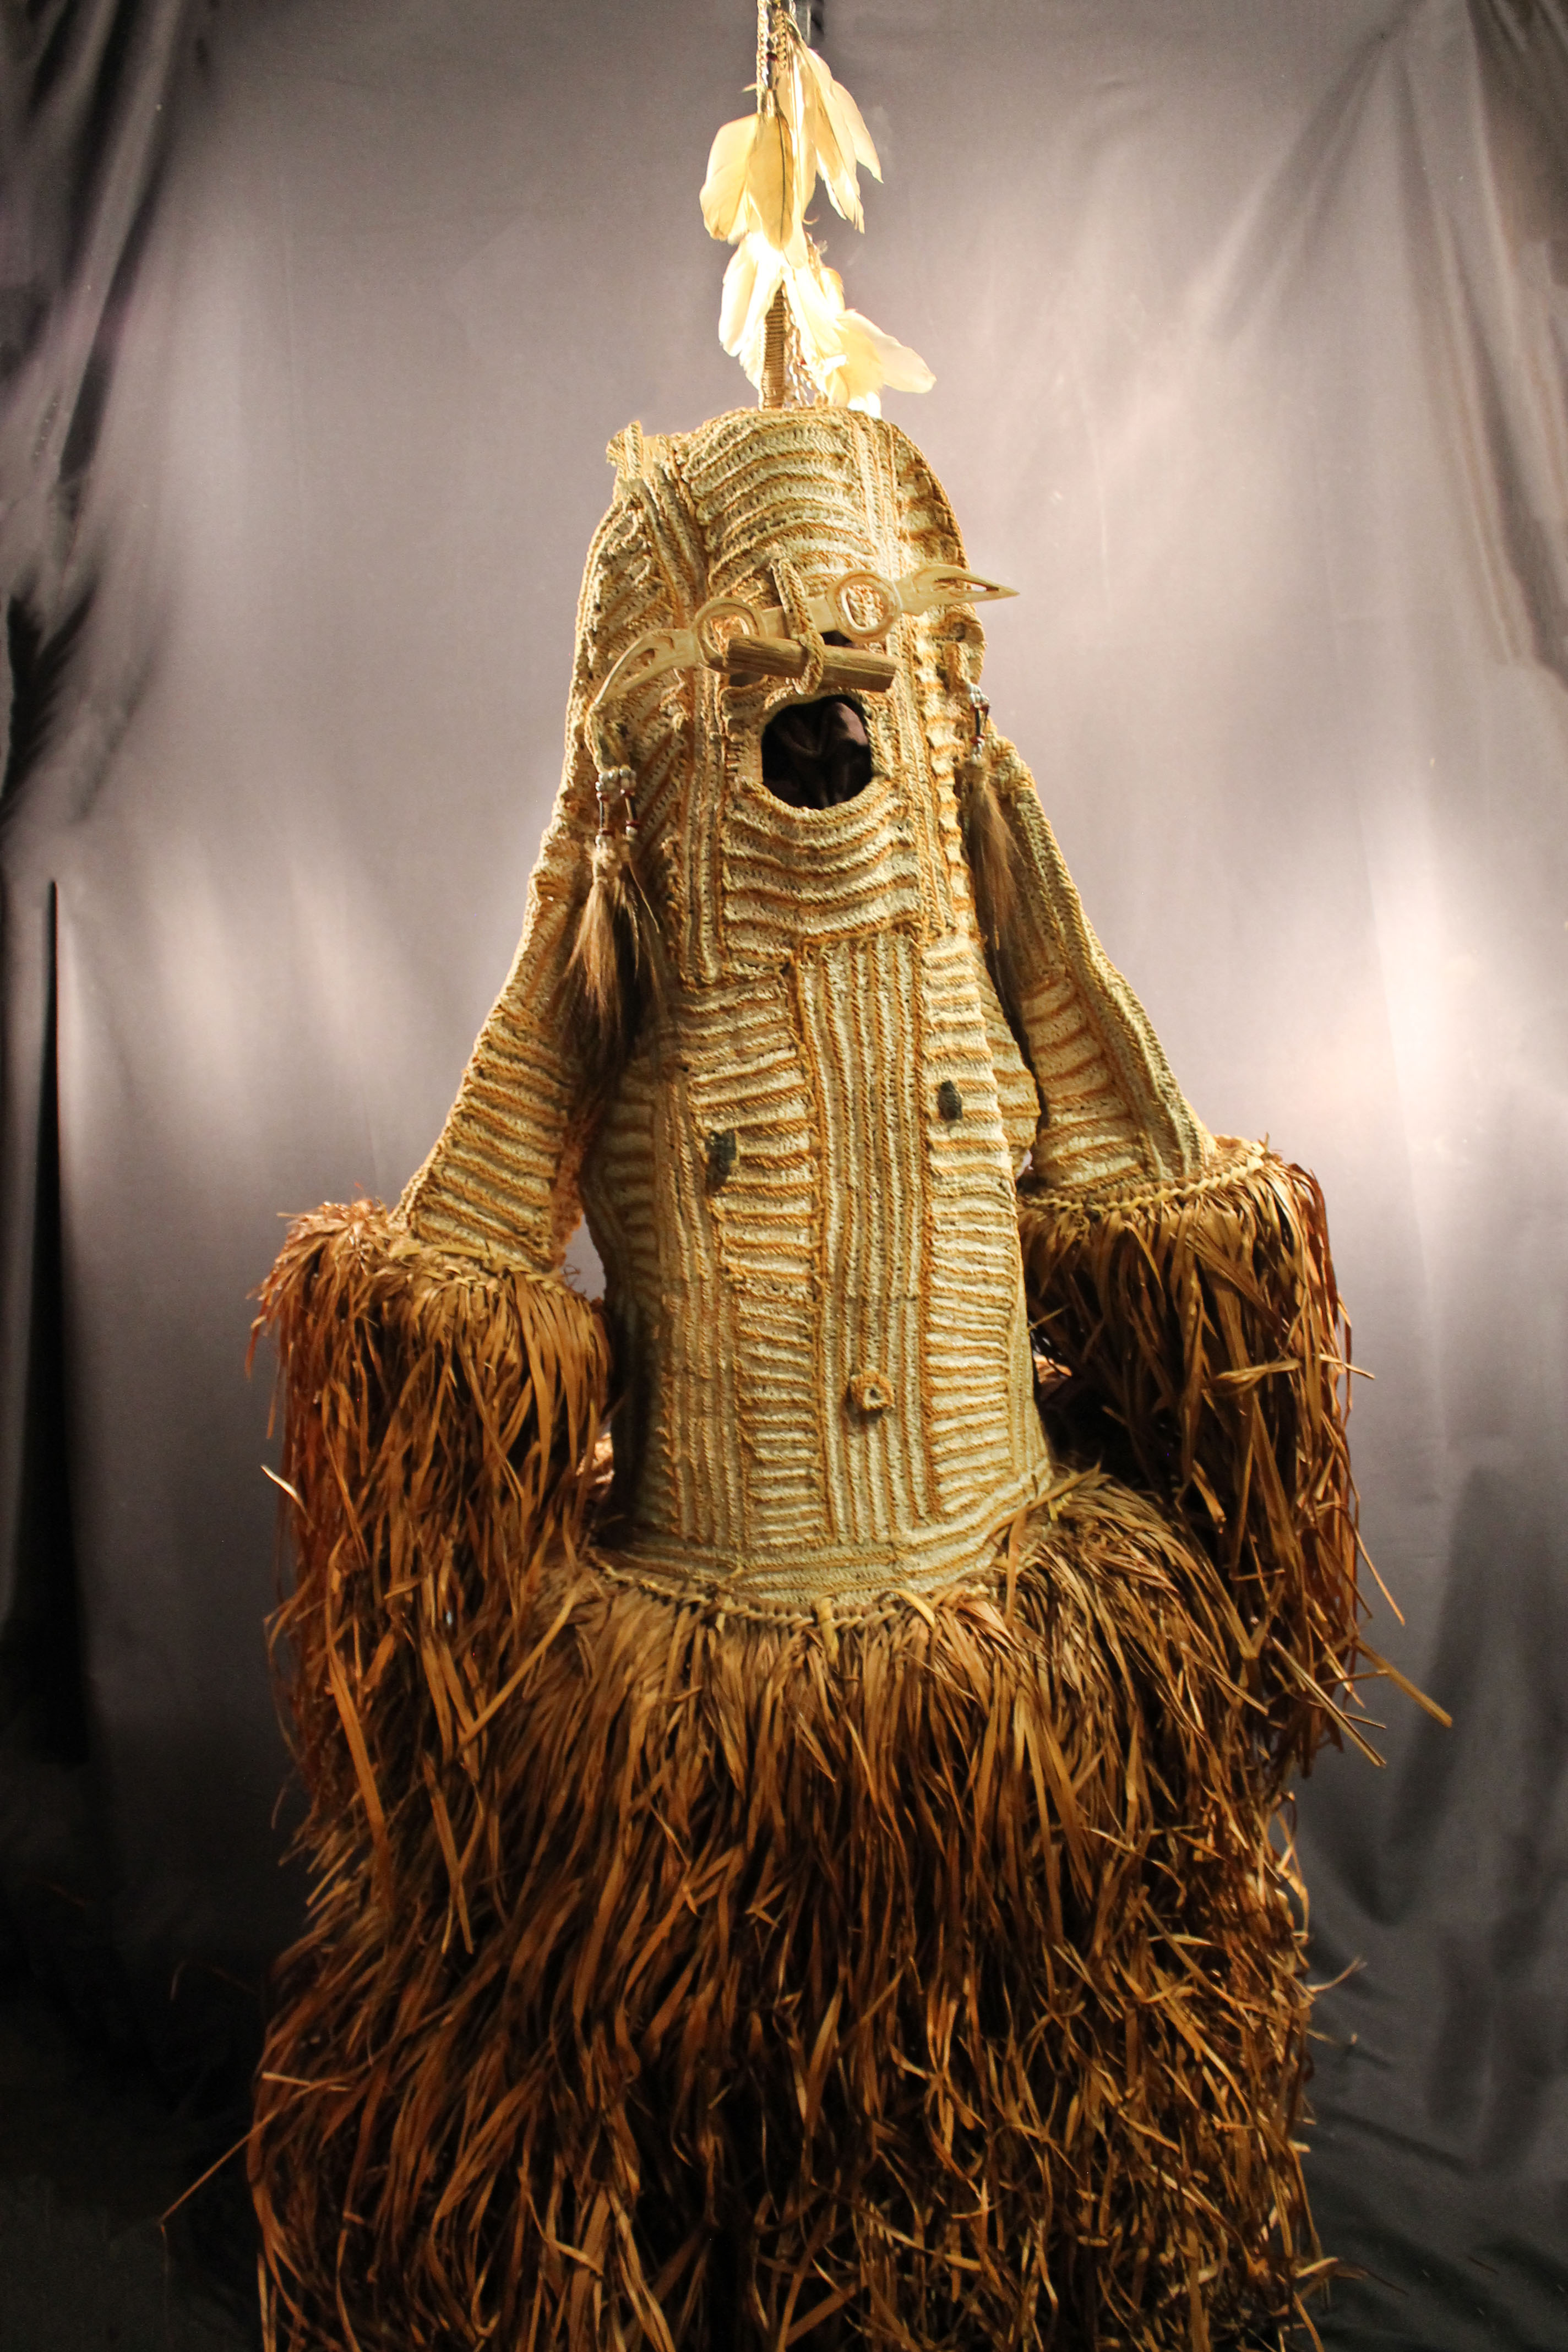 Woven body masks that has a grass skirt and sleeves with striped brown and white design on the center.